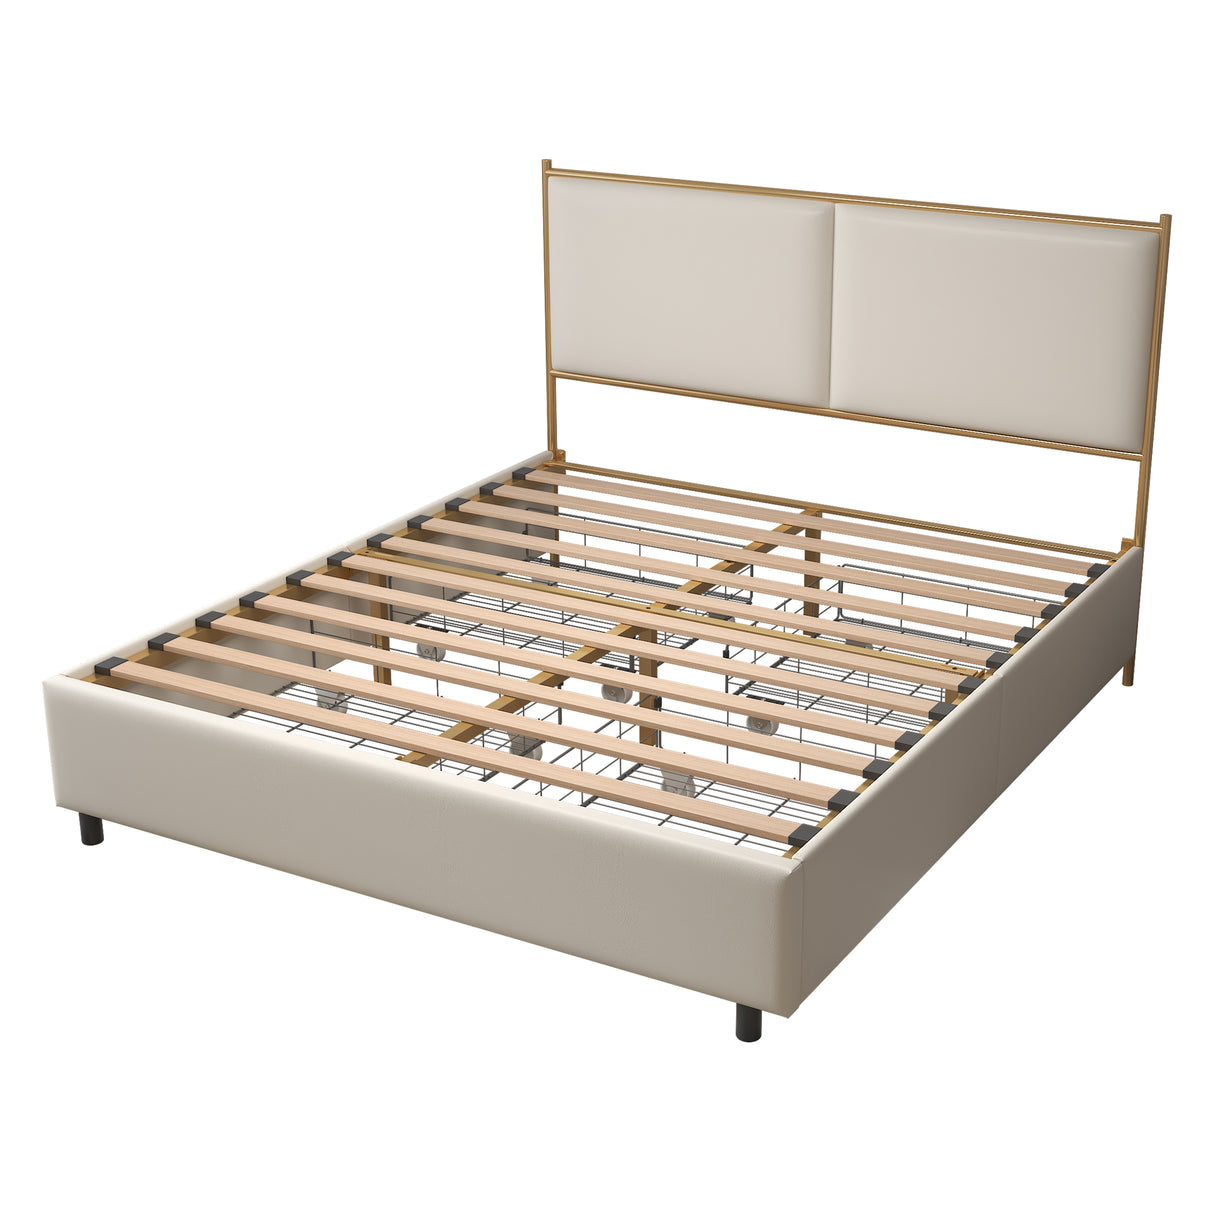 Classic steamed bread shaped backrest, metal frame, solid wood ribs, with four storage drawers, sponge soft bag, comfortable and elegant atmosphere, white, Full-size sleeping bed. - Home Elegance USA